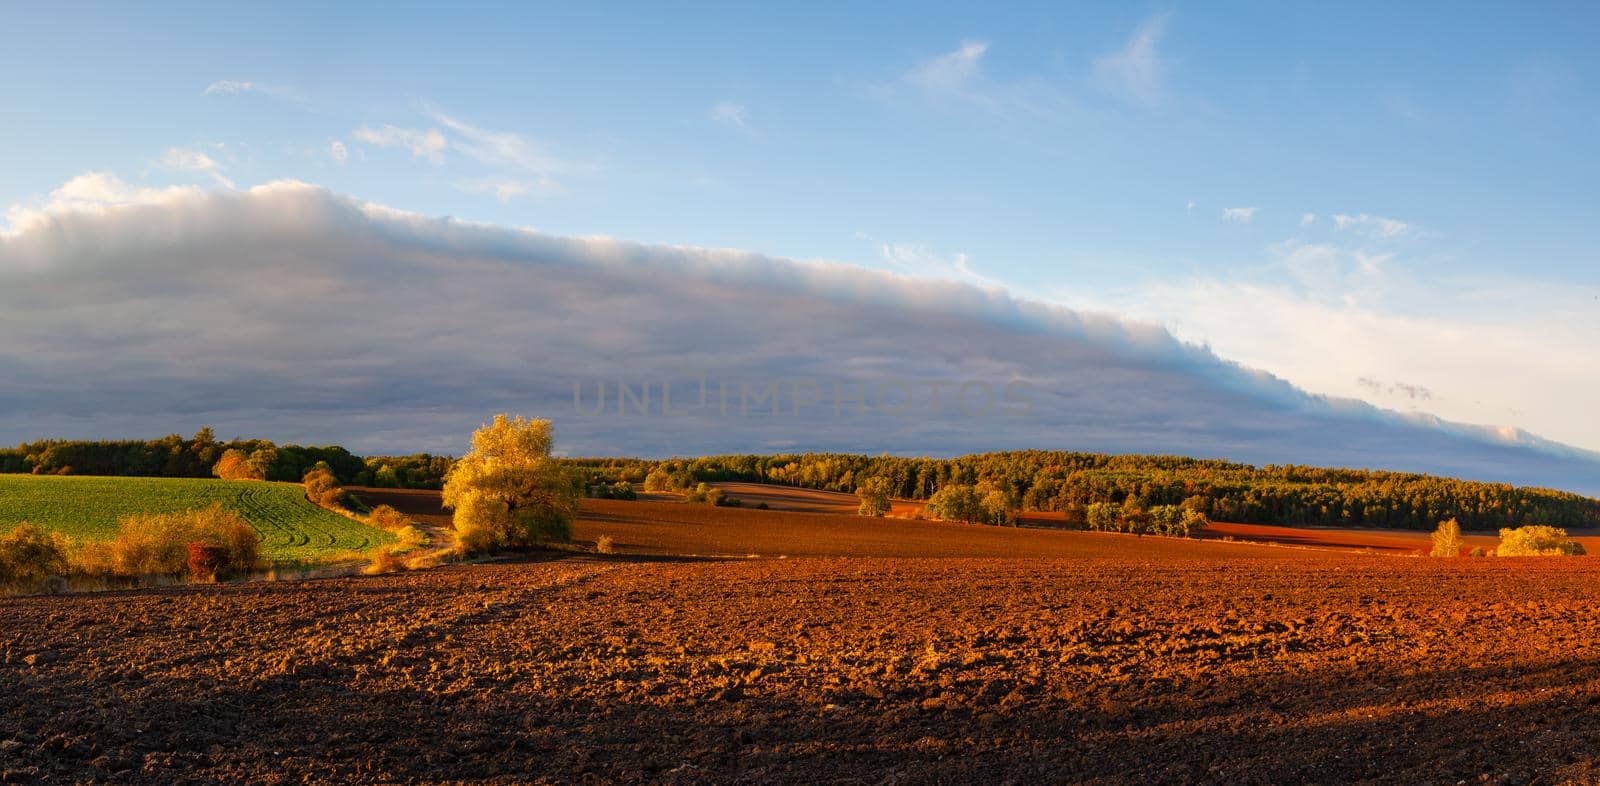 On the empty field after harvesting in summer evening. Czech Republic. Amazing sunset in Czech Bohemian Uplands. Panorama Image.